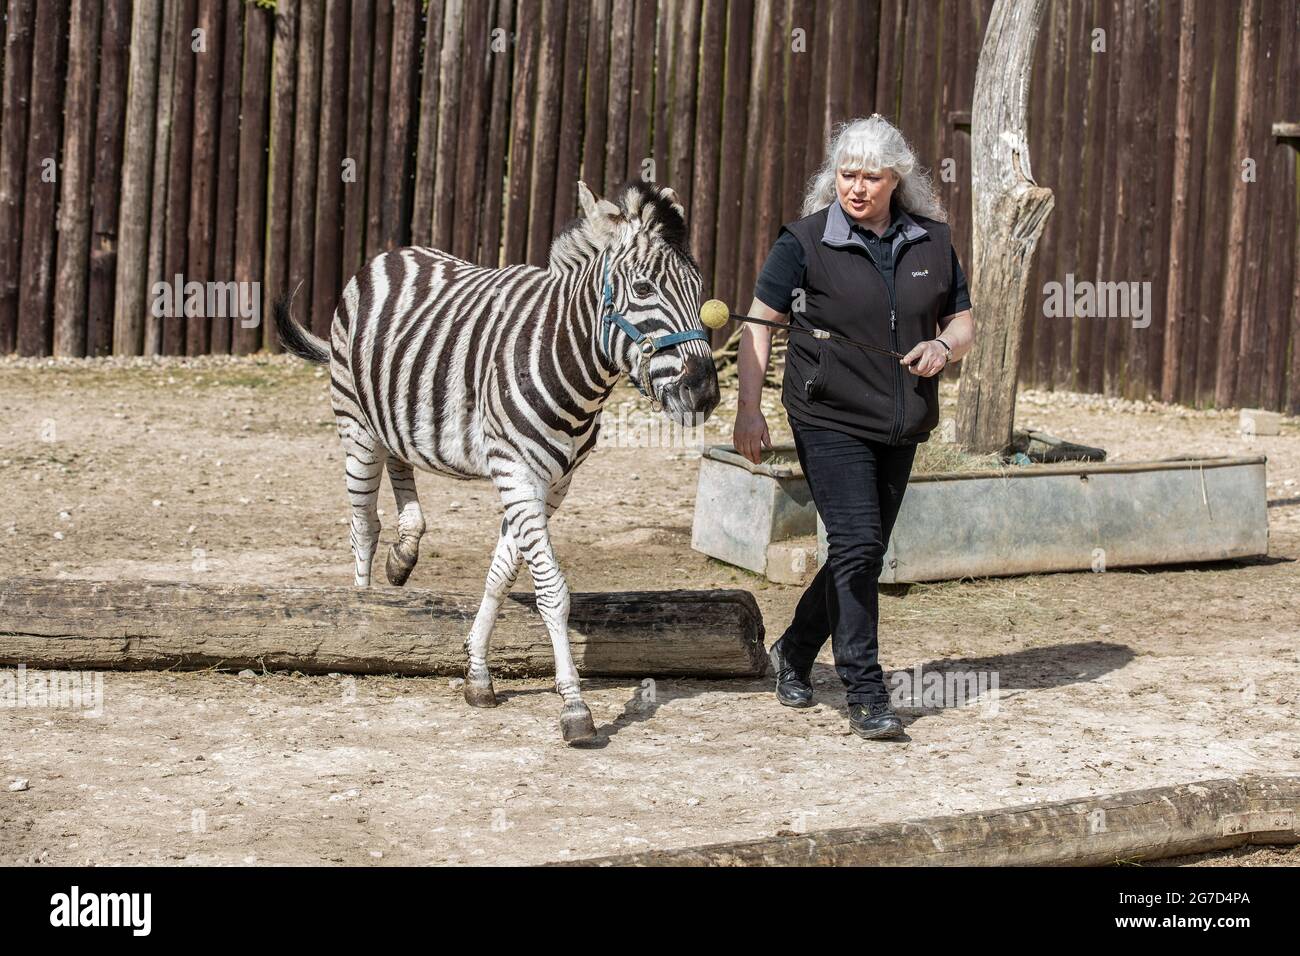 Brabrara Marquez, Head of Ungulates at  'Amazing Animals with Zebras featured in many commercials including ‘Investec’ adverts, Chipping Norton, UK Stock Photo